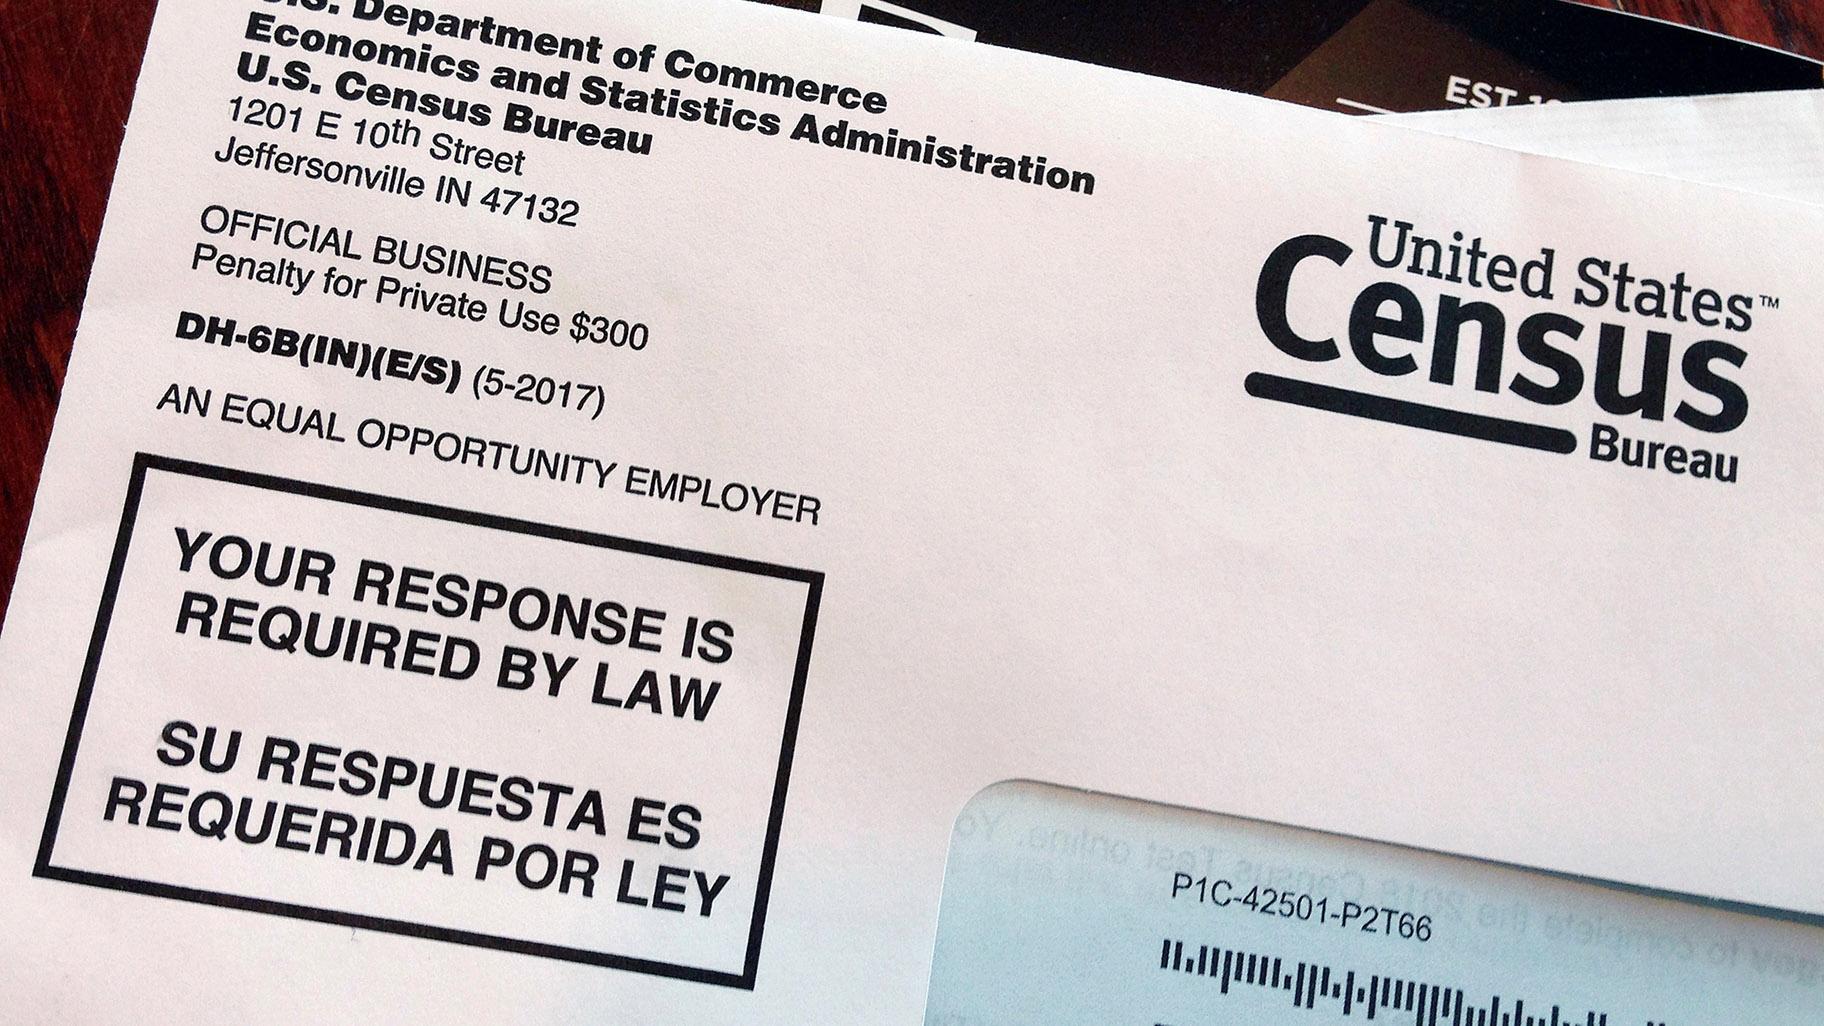 This March 23, 2018, file photo shows an envelope containing a 2018 census letter mailed to a U.S. resident as part of the nation’s only test run of the 2020 Census. (AP Photo / Michelle R. Smith, File)